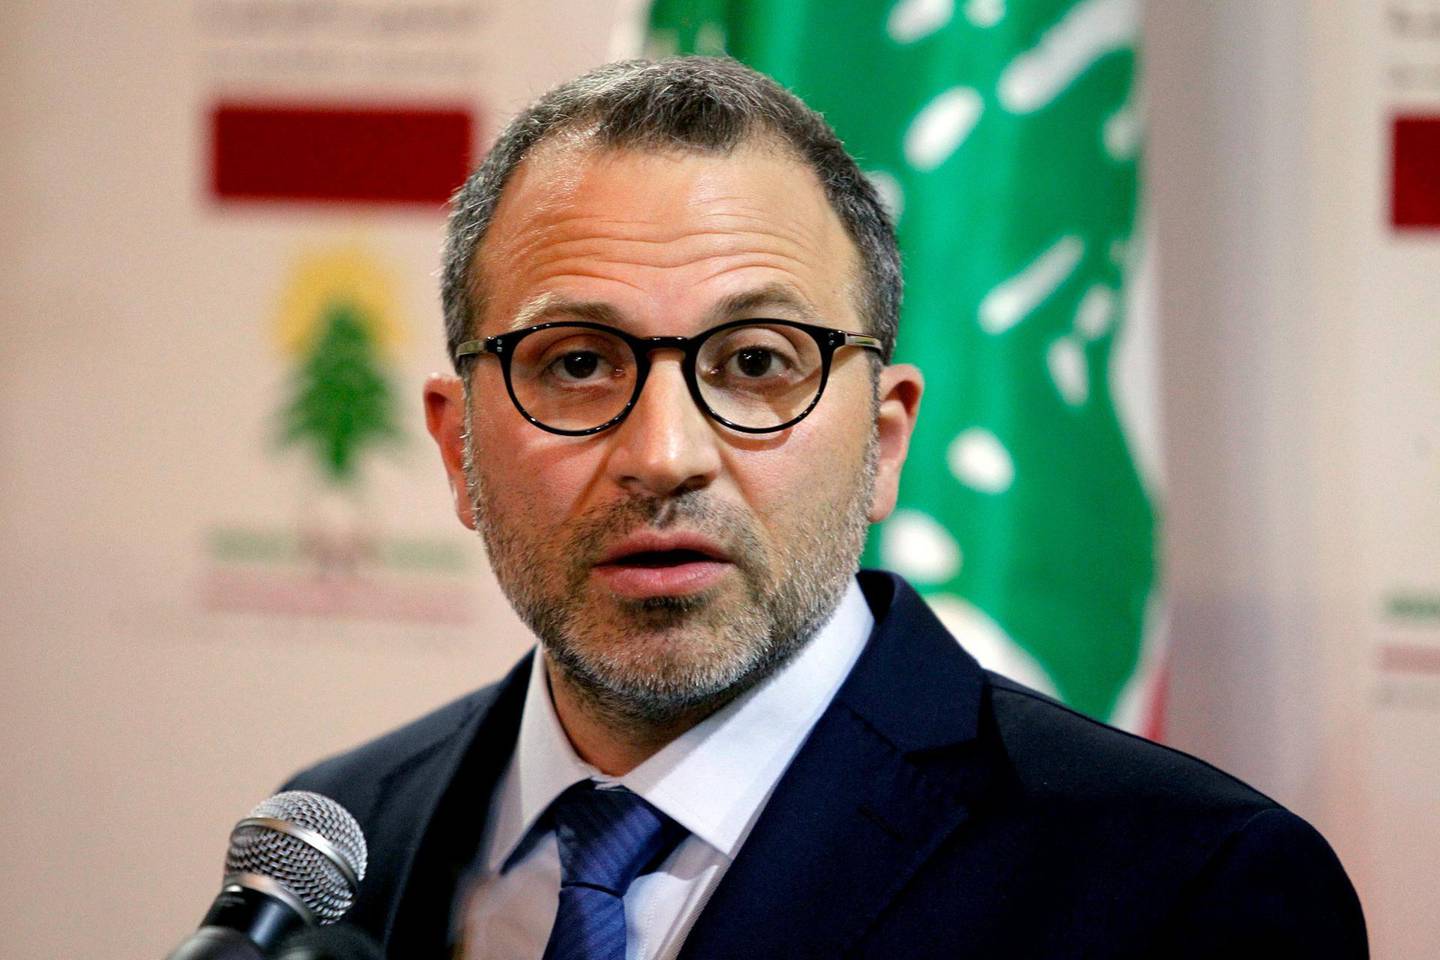 FILE PHOTO: Lebanon's Foreign Minister Gebran Bassil gestures as he speaks during a news conference in Beirut, Lebanon June 4, 2018. REUTERS/Mohamed Azakir/File Photo